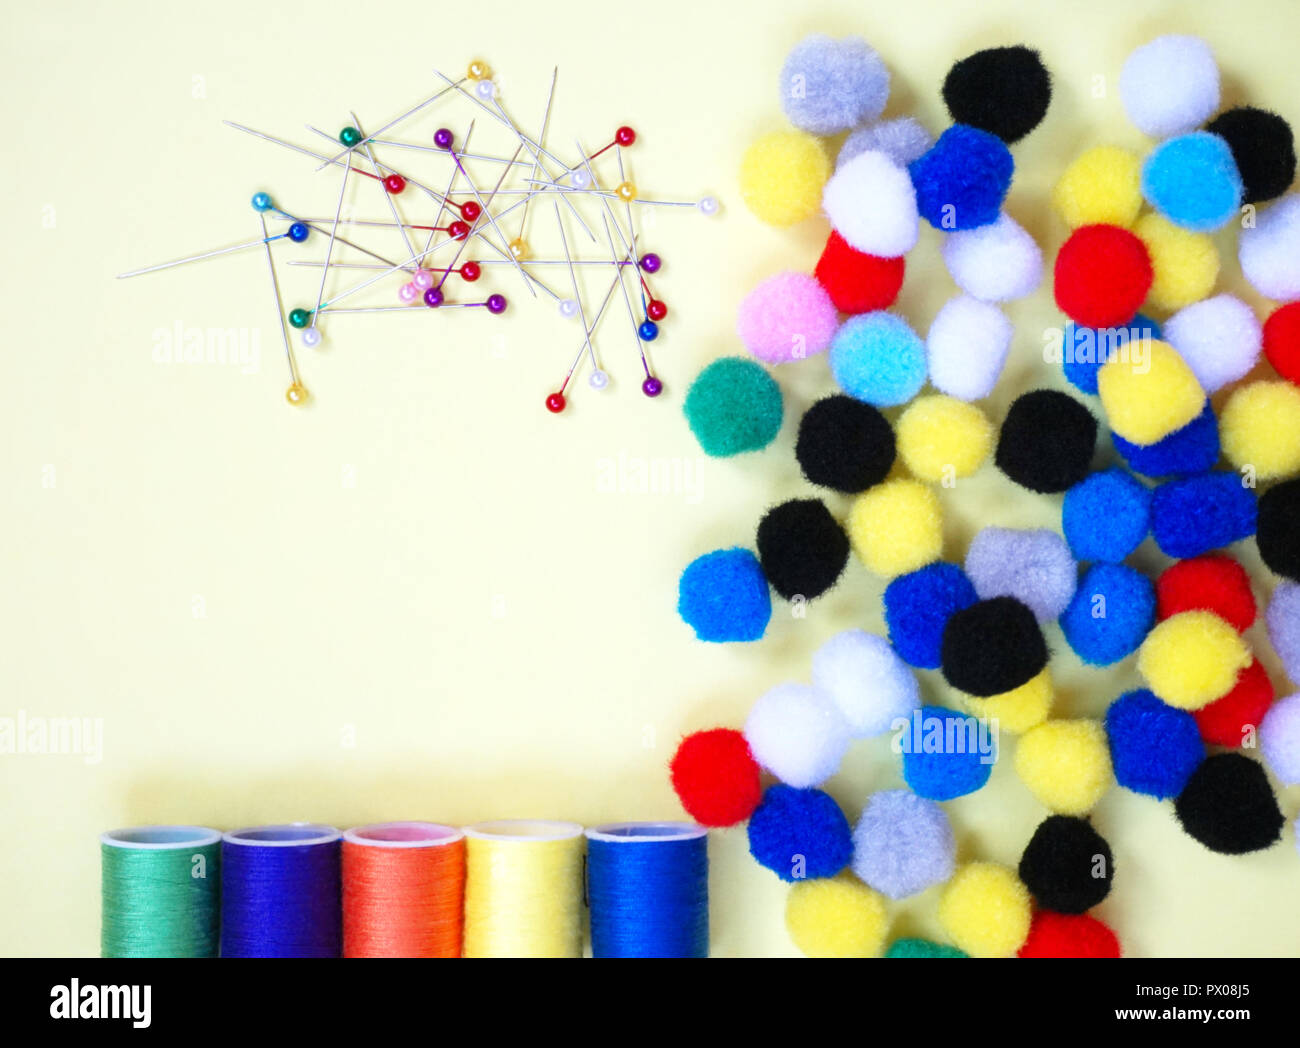 Pins, cotton threads and mini pom-poms, sewing accessories in different vivid color Stock Photo